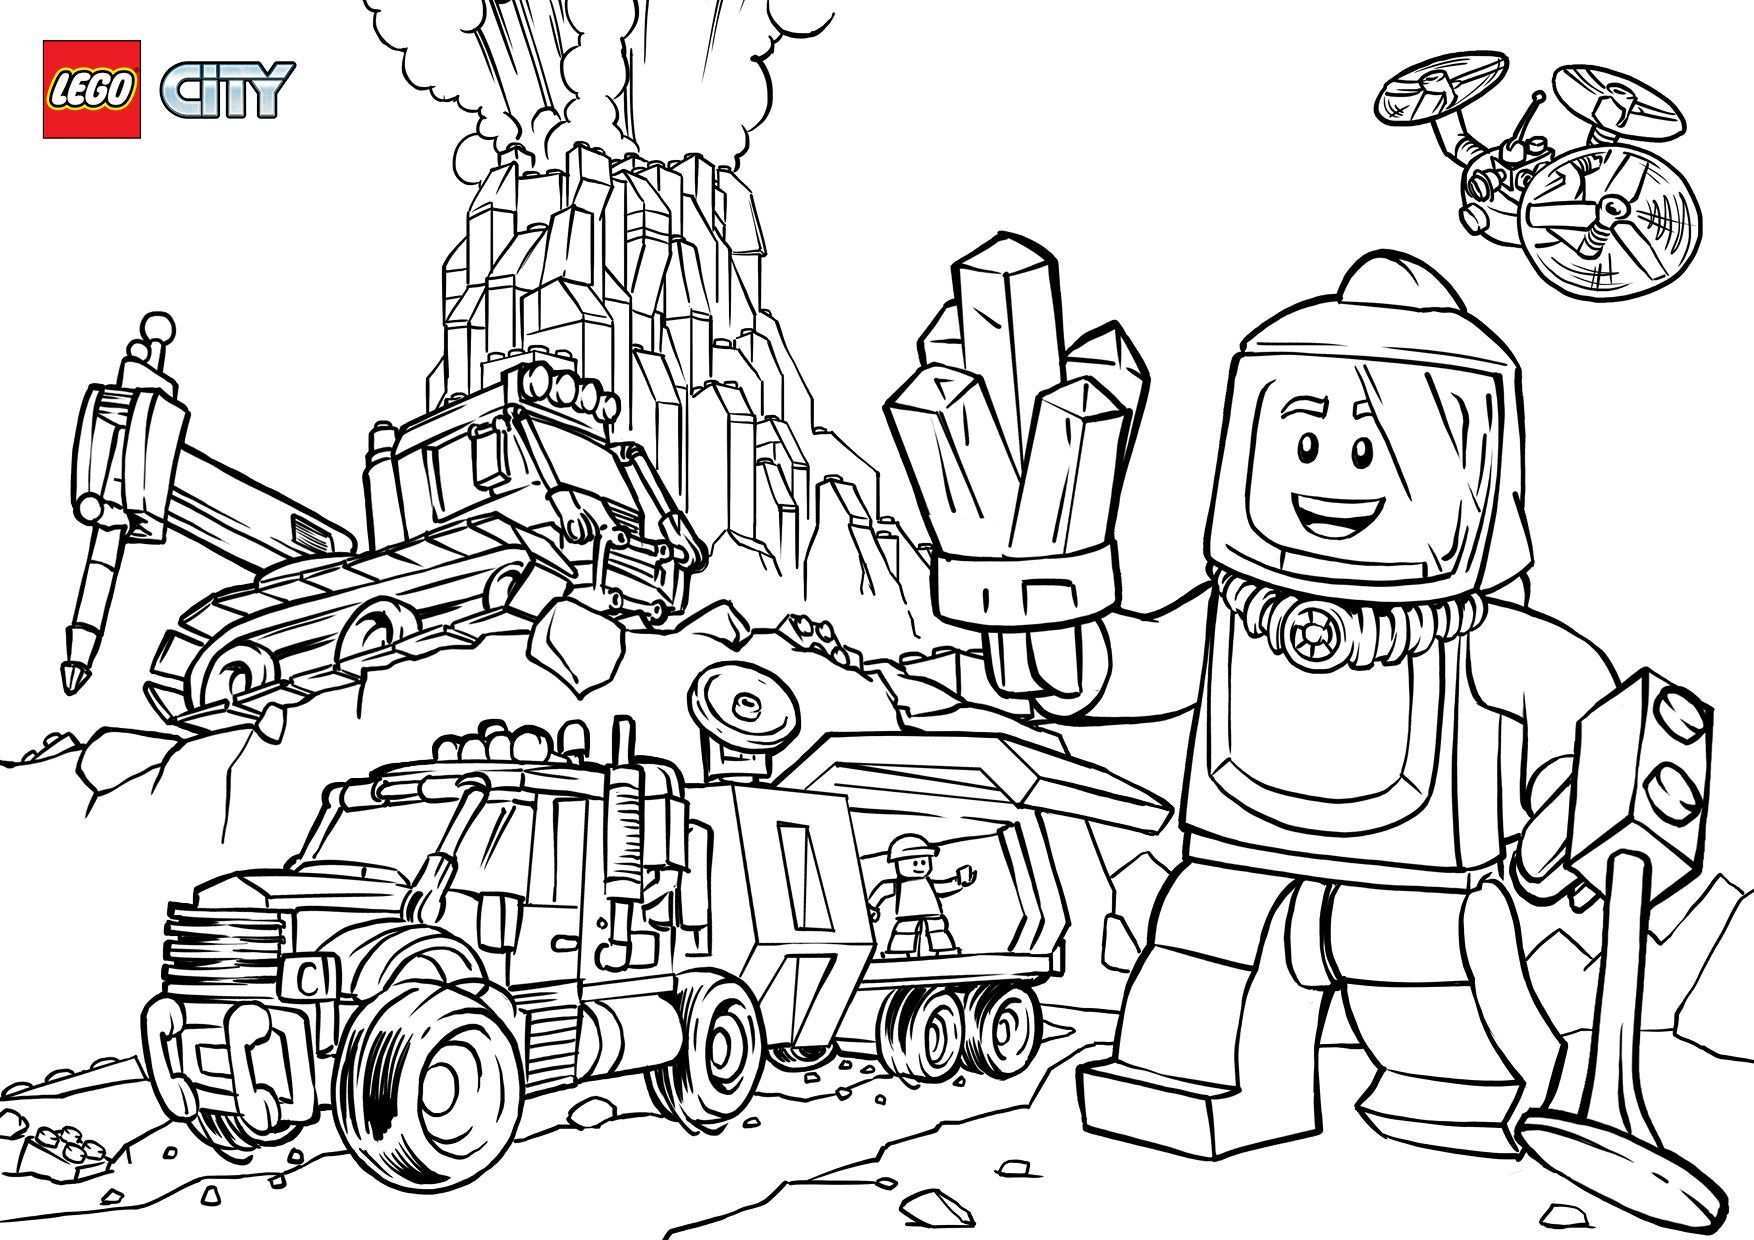 Lego City Coloring Lego Coloring Pages Lego Coloring Sheet Lego Movie Coloring Pages